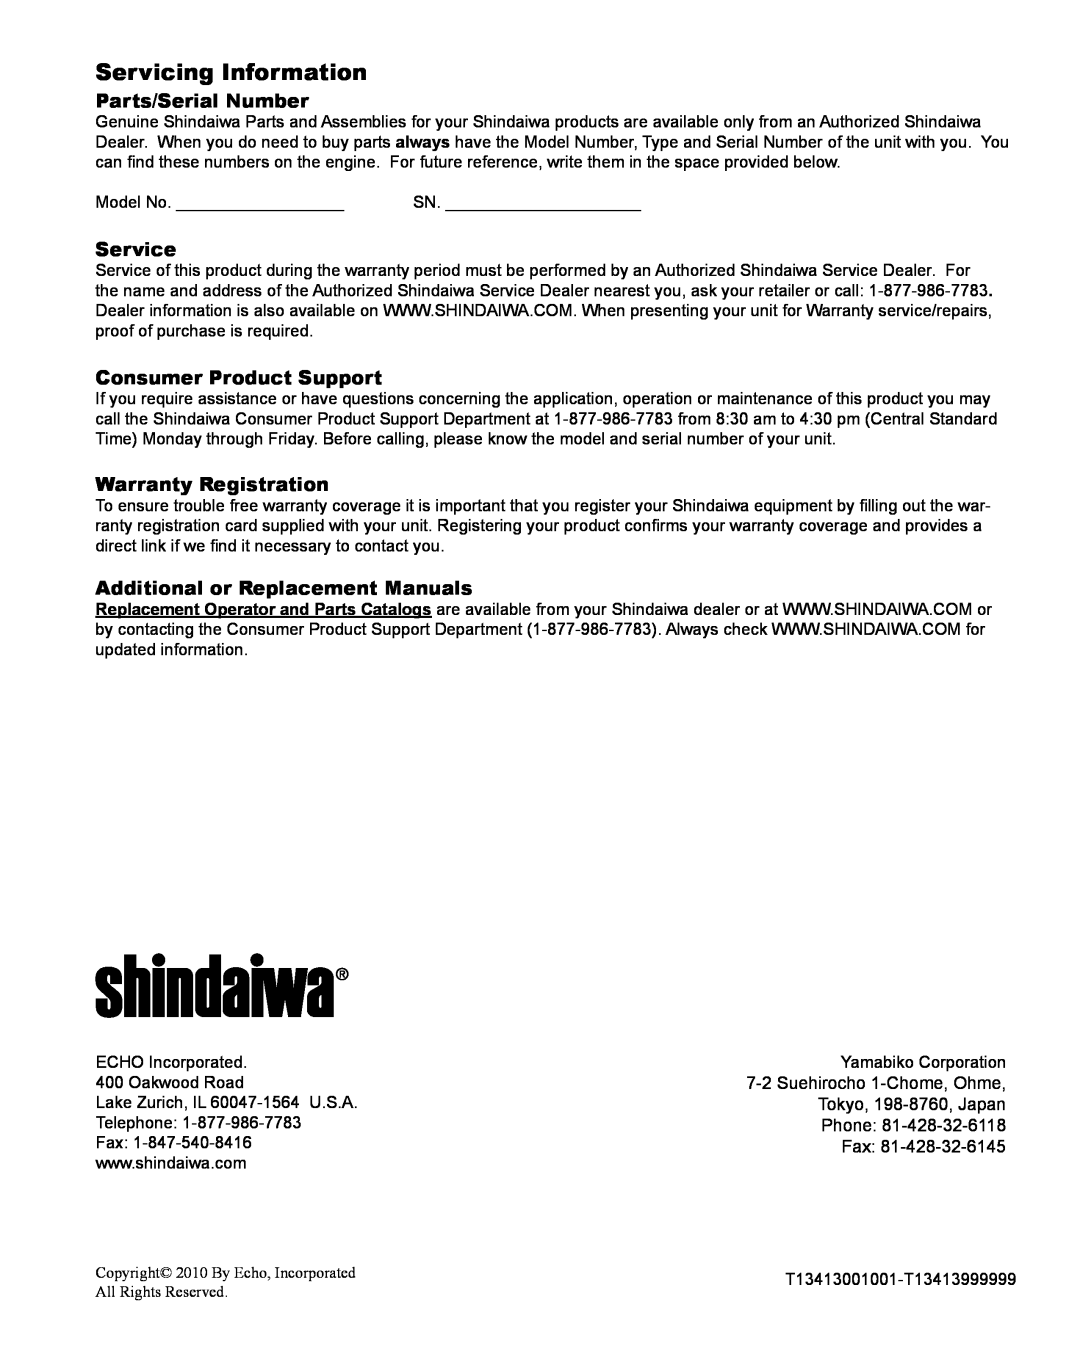 Shindaiwa X7502825800 Servicing Information, Parts/Serial Number, Service, Consumer Product Support, Warranty Registration 